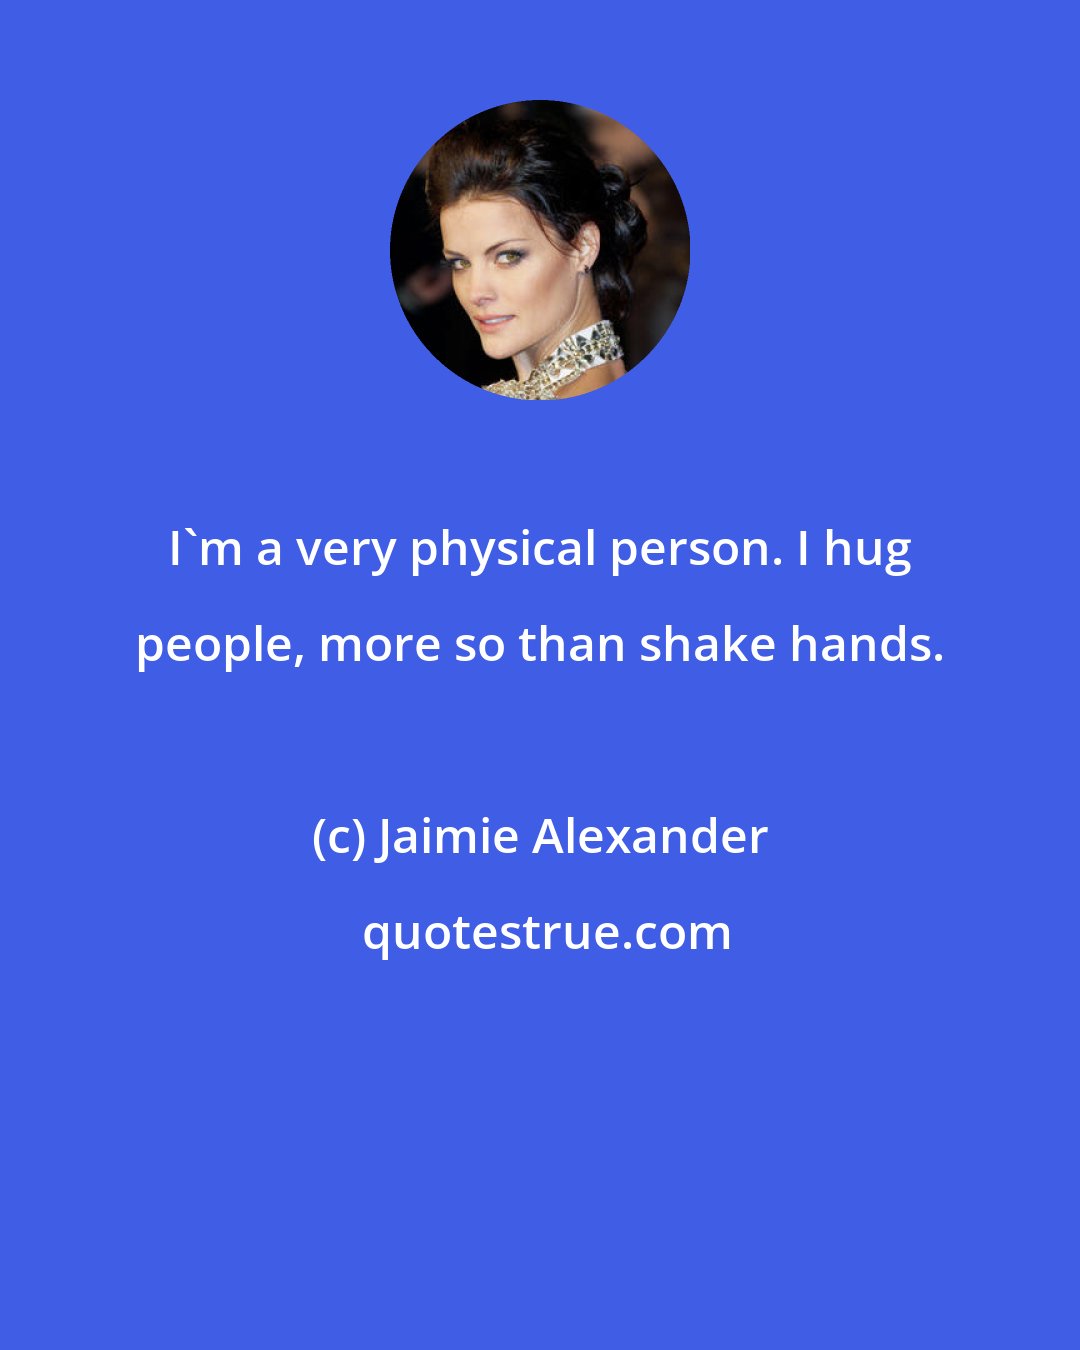 Jaimie Alexander: I'm a very physical person. I hug people, more so than shake hands.